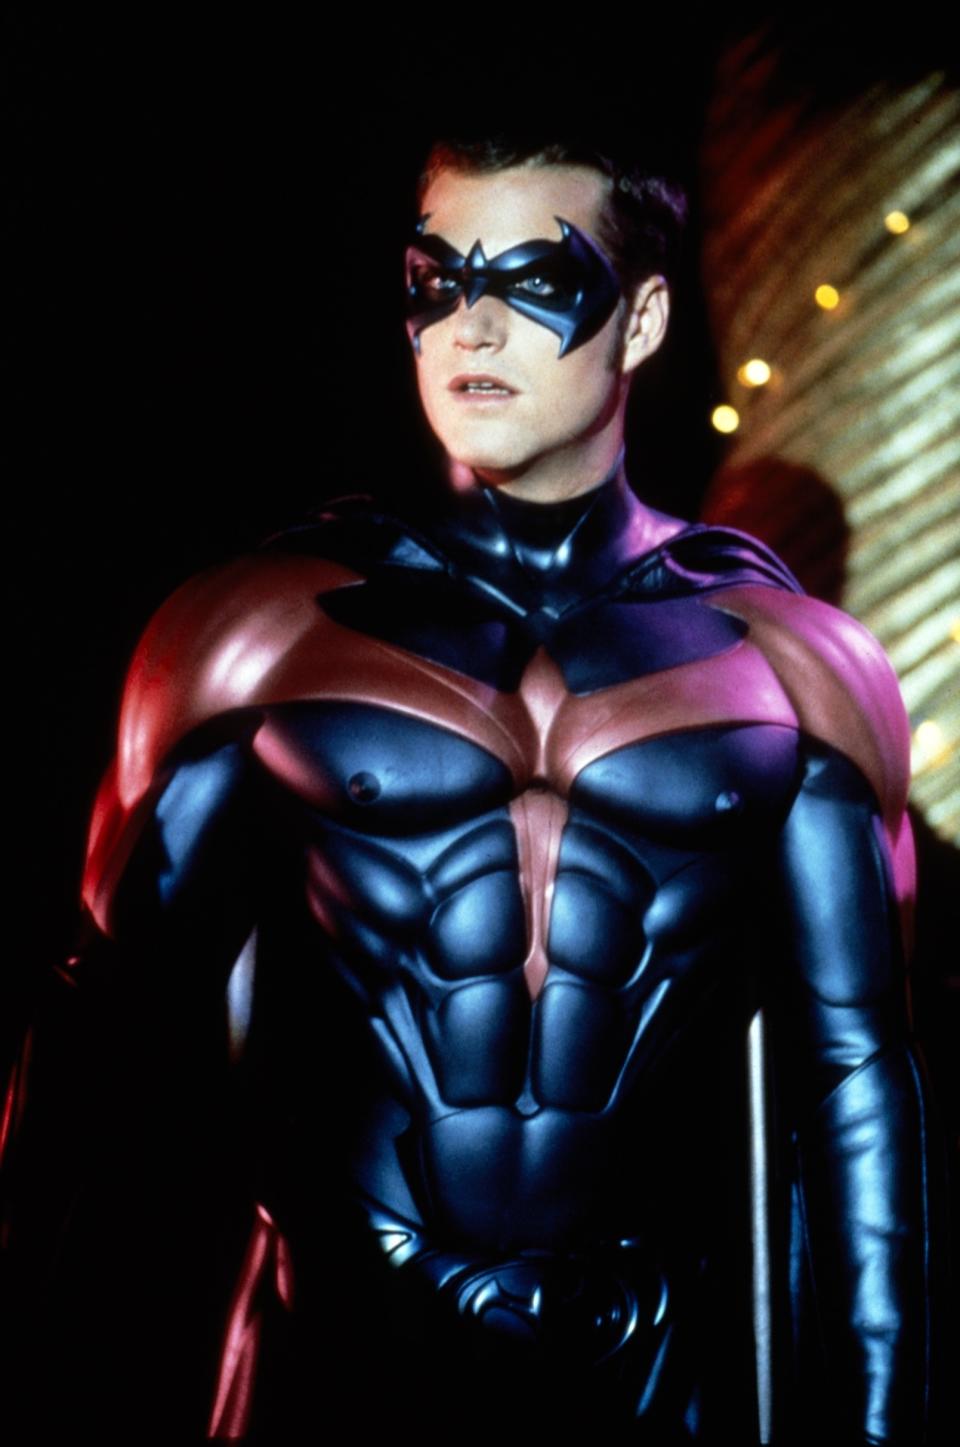 Chris O'Donnell as Robin in a superhero costume with a detailed, muscular design, from a scene in a Batman movie